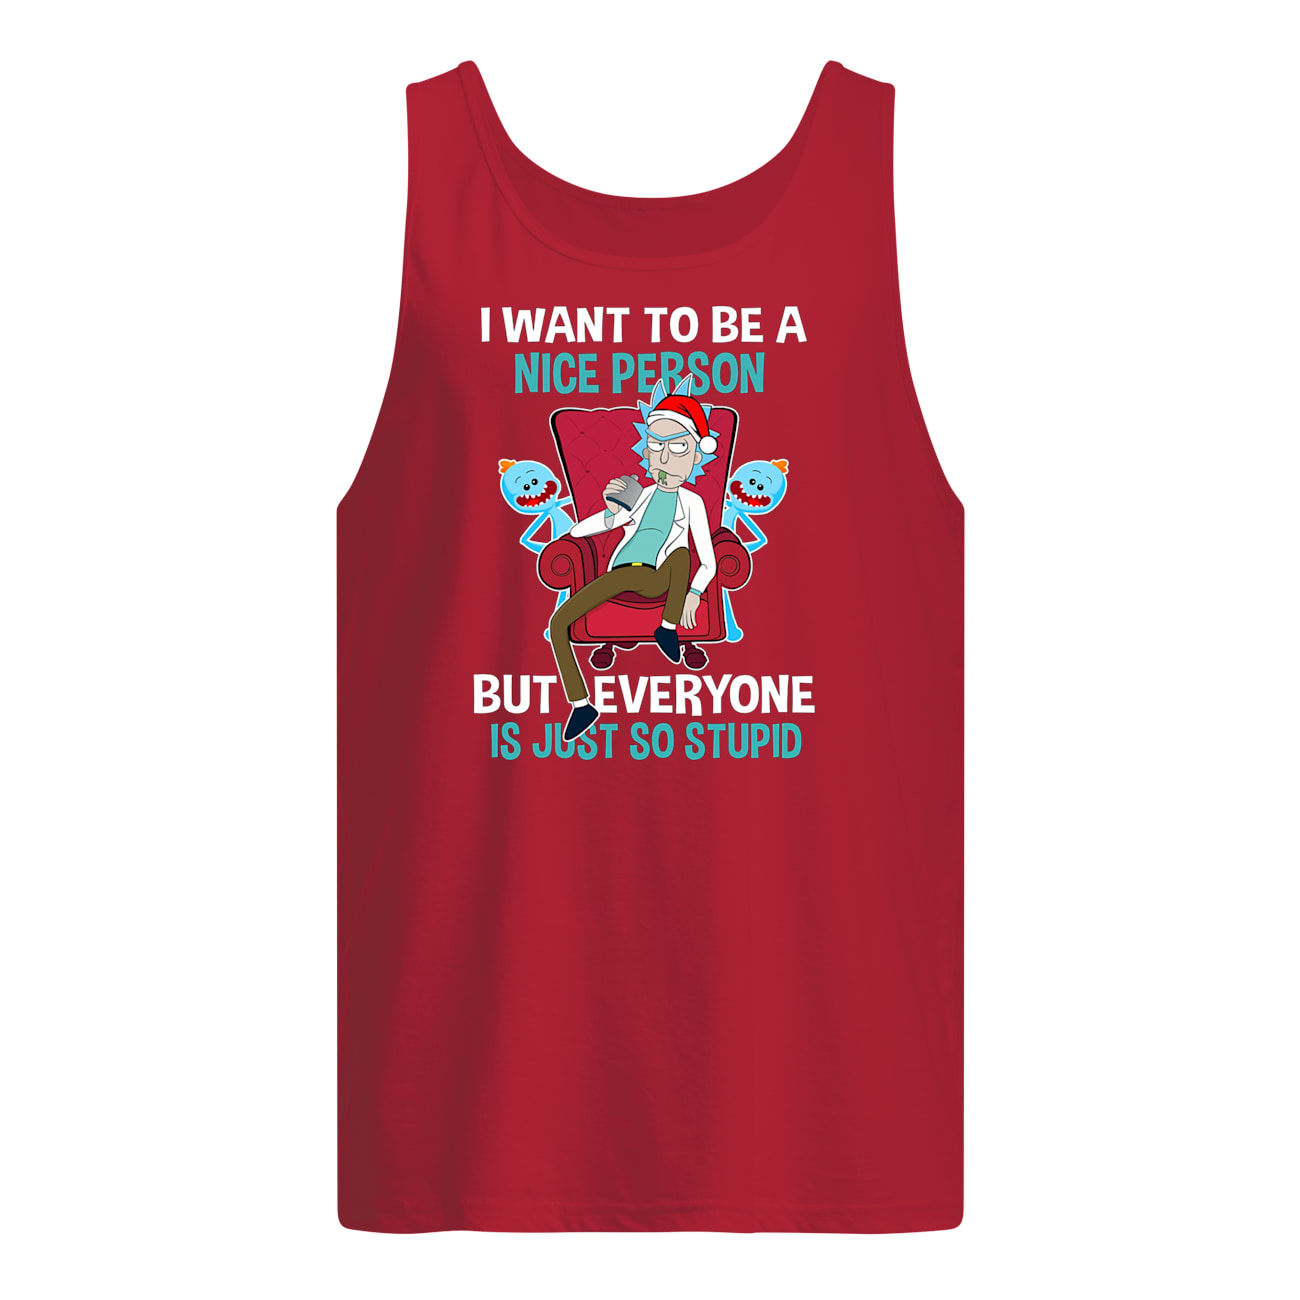 I want to be a nice person but everyone is just so stupid rick and morty tank top